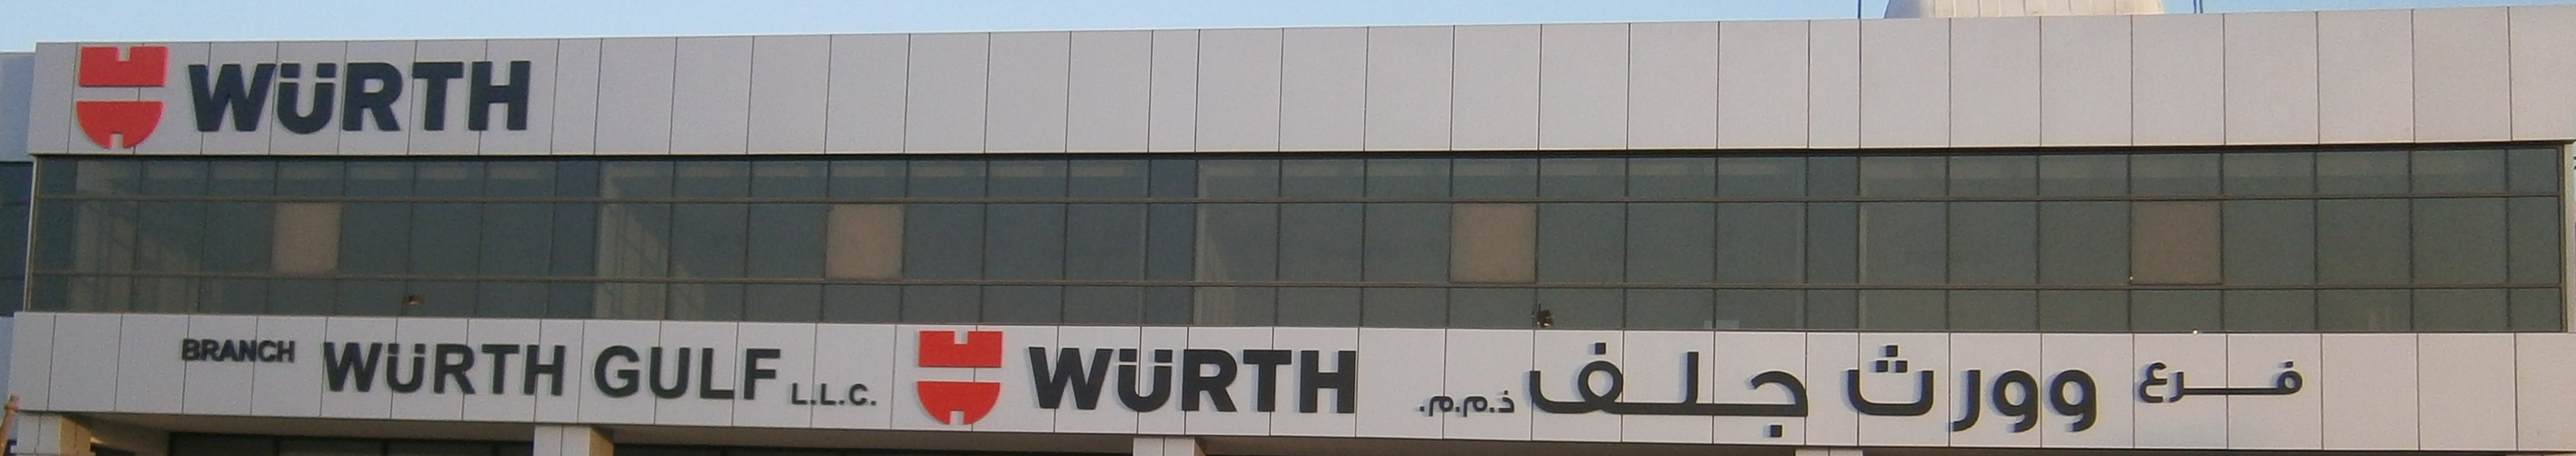 <h2>WURTH - External Sign</h2><br/>